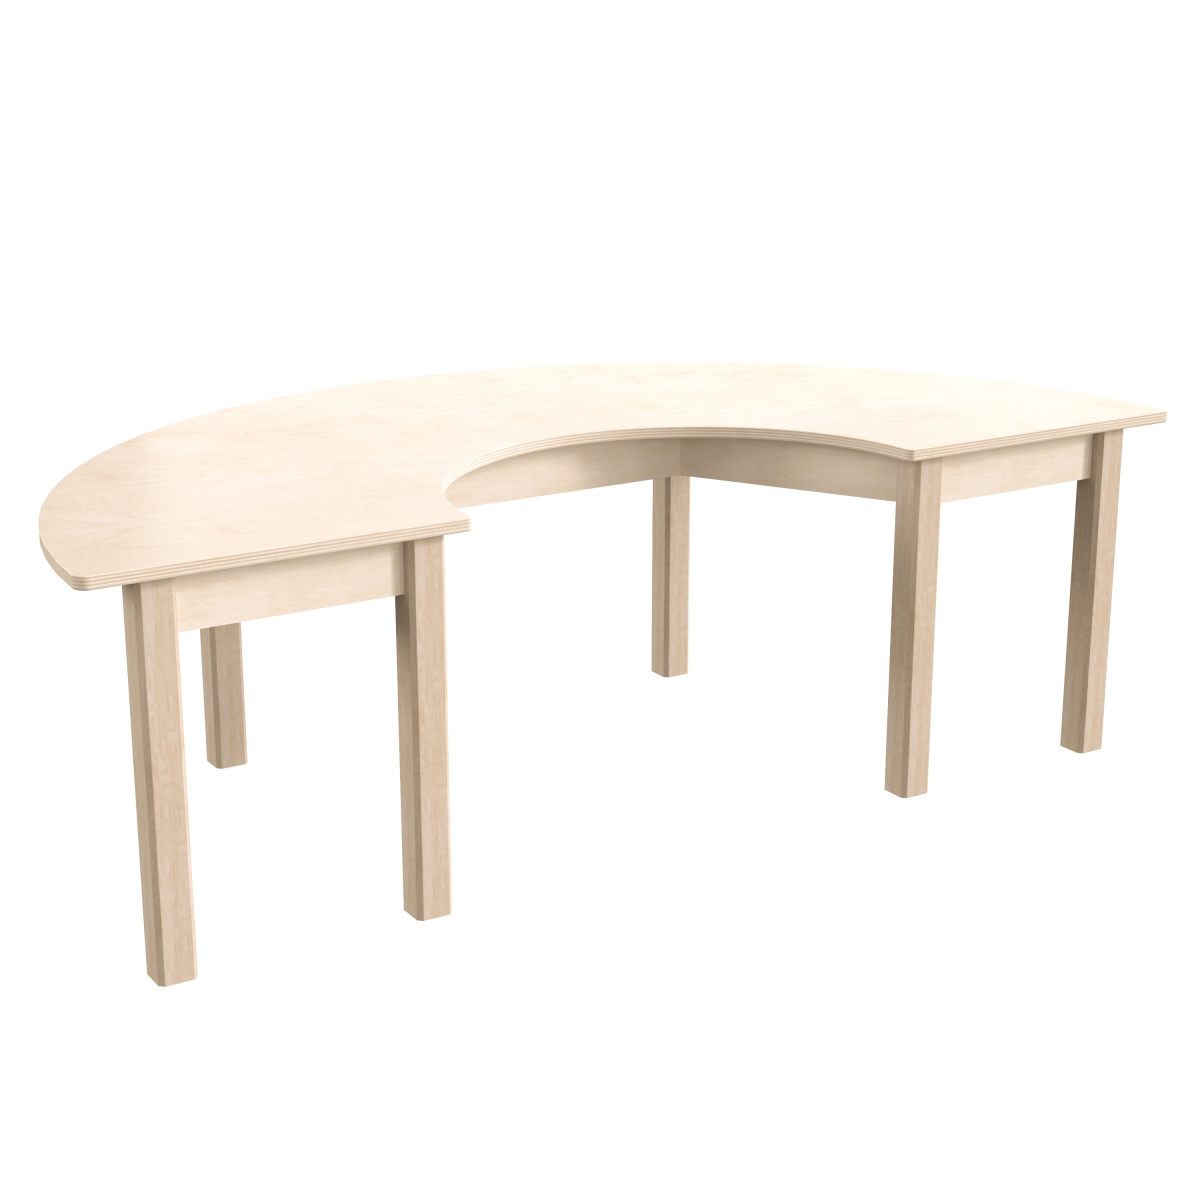 Picture of Flash Furniture MK-ME088014-GG 29.5 x 59 x 18 in. Bright Beginnings Commercial Grade Wooden Half Circle Preschool Classroom Activity Table, Beech